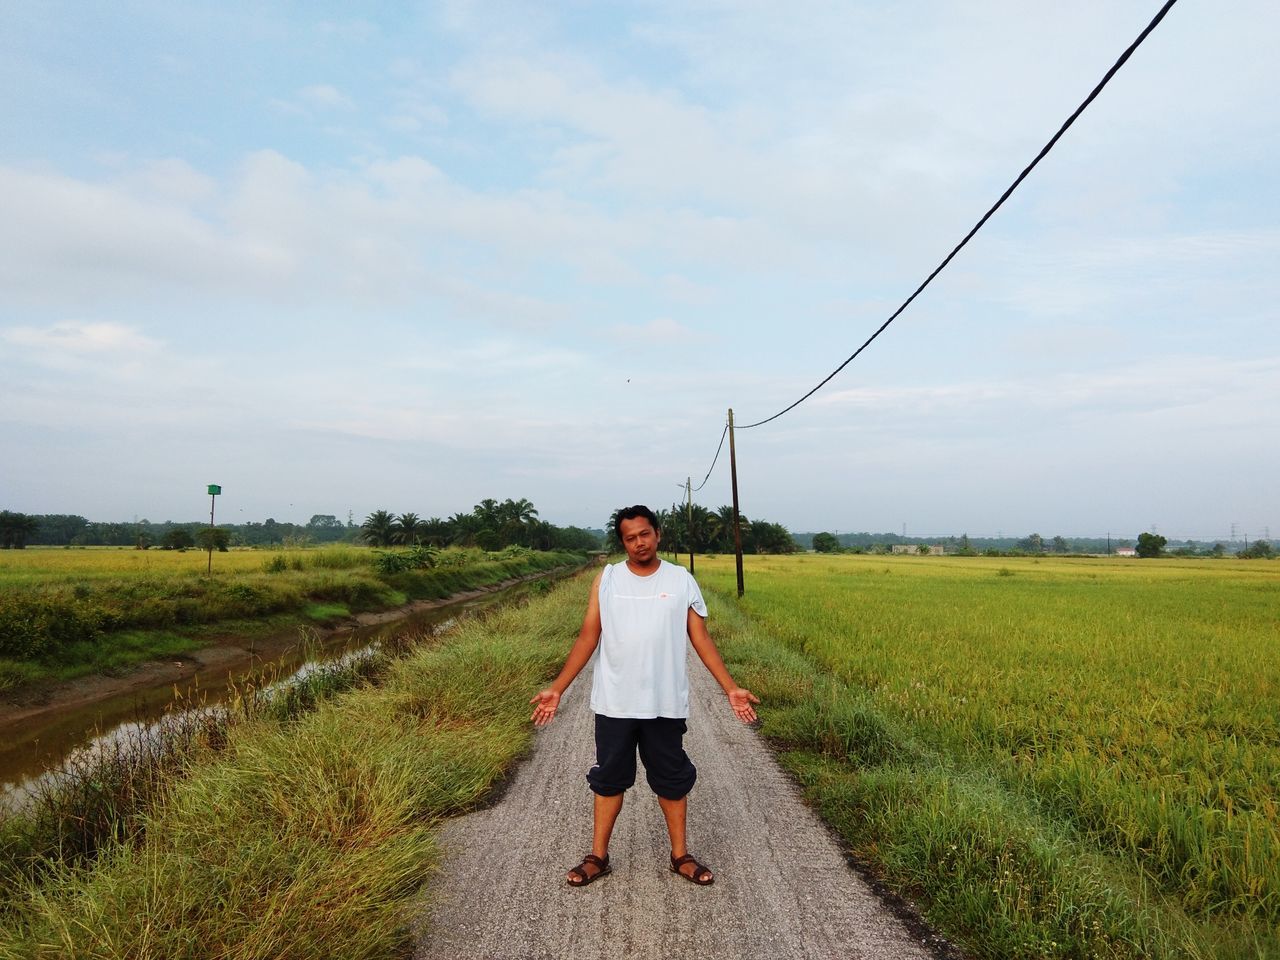 sky, one person, front view, real people, full length, land, field, landscape, cloud - sky, plant, nature, growth, environment, grass, day, casual clothing, standing, lifestyles, leisure activity, diminishing perspective, outdoors